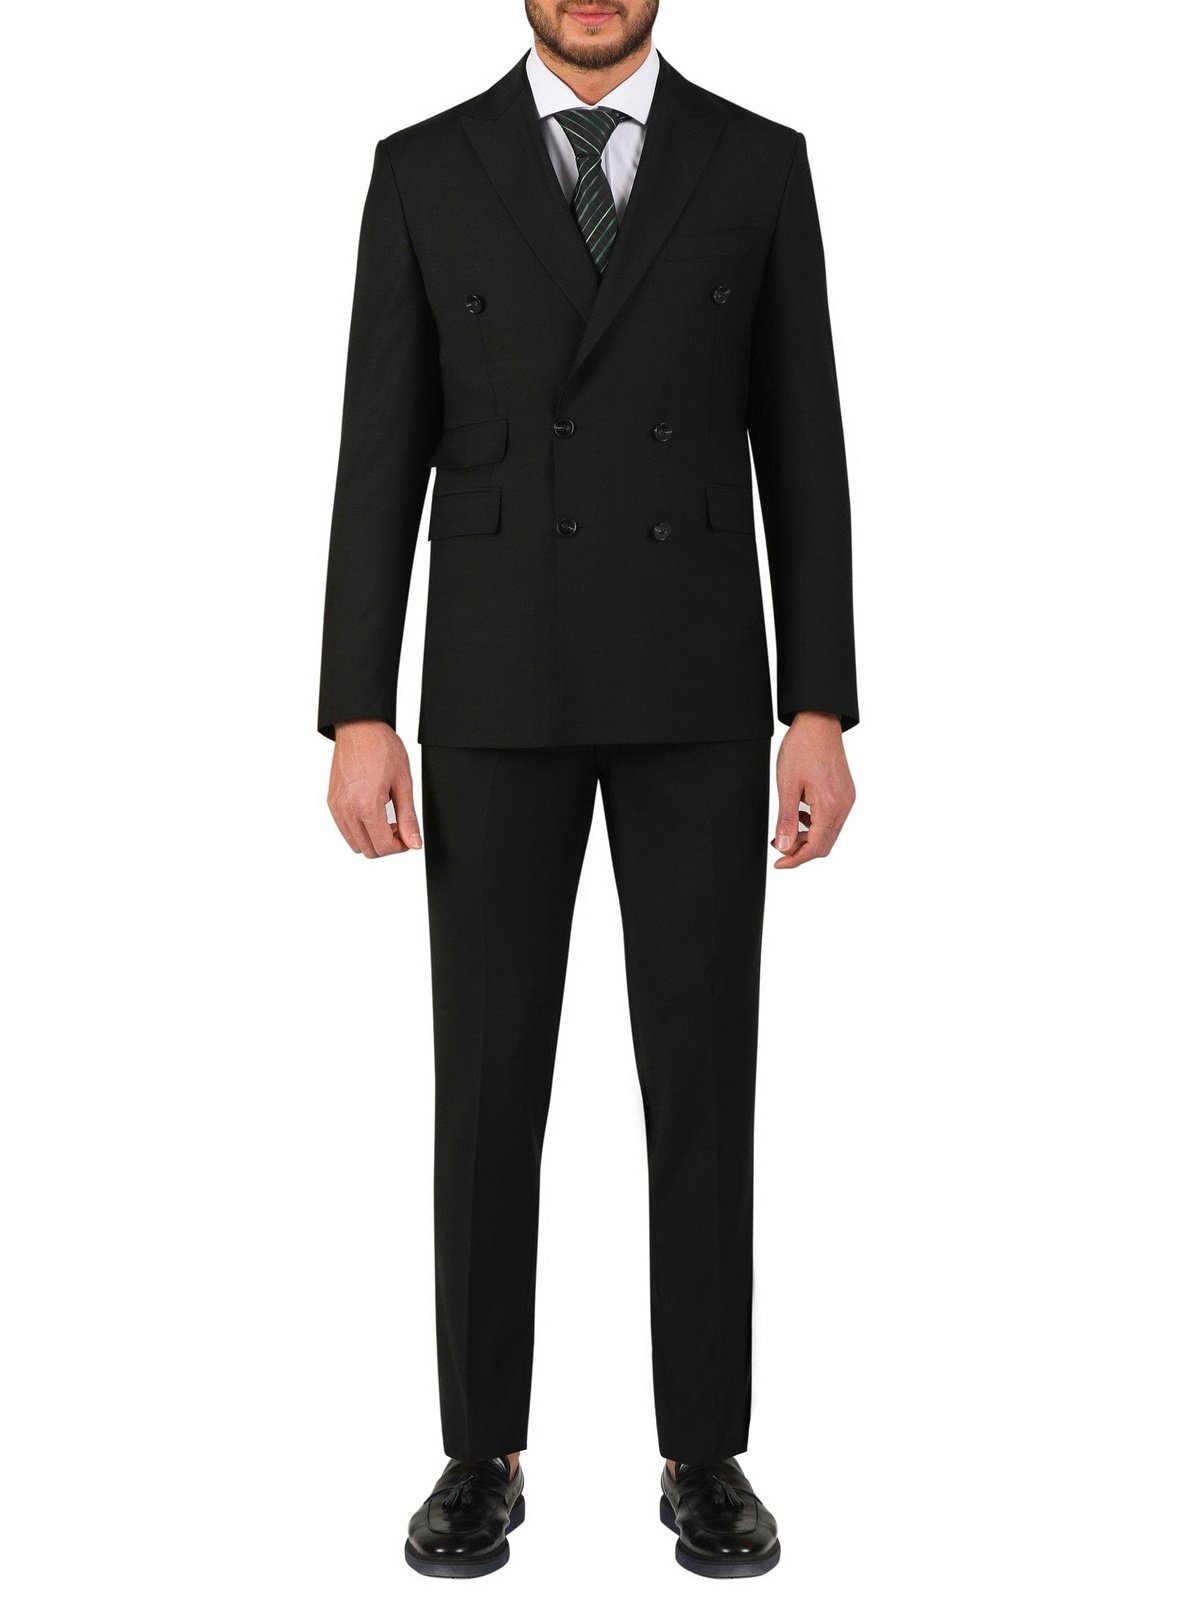 Di'nucci SUITS 36S Di'nucci Solid Black Double Breasted Wool Suit